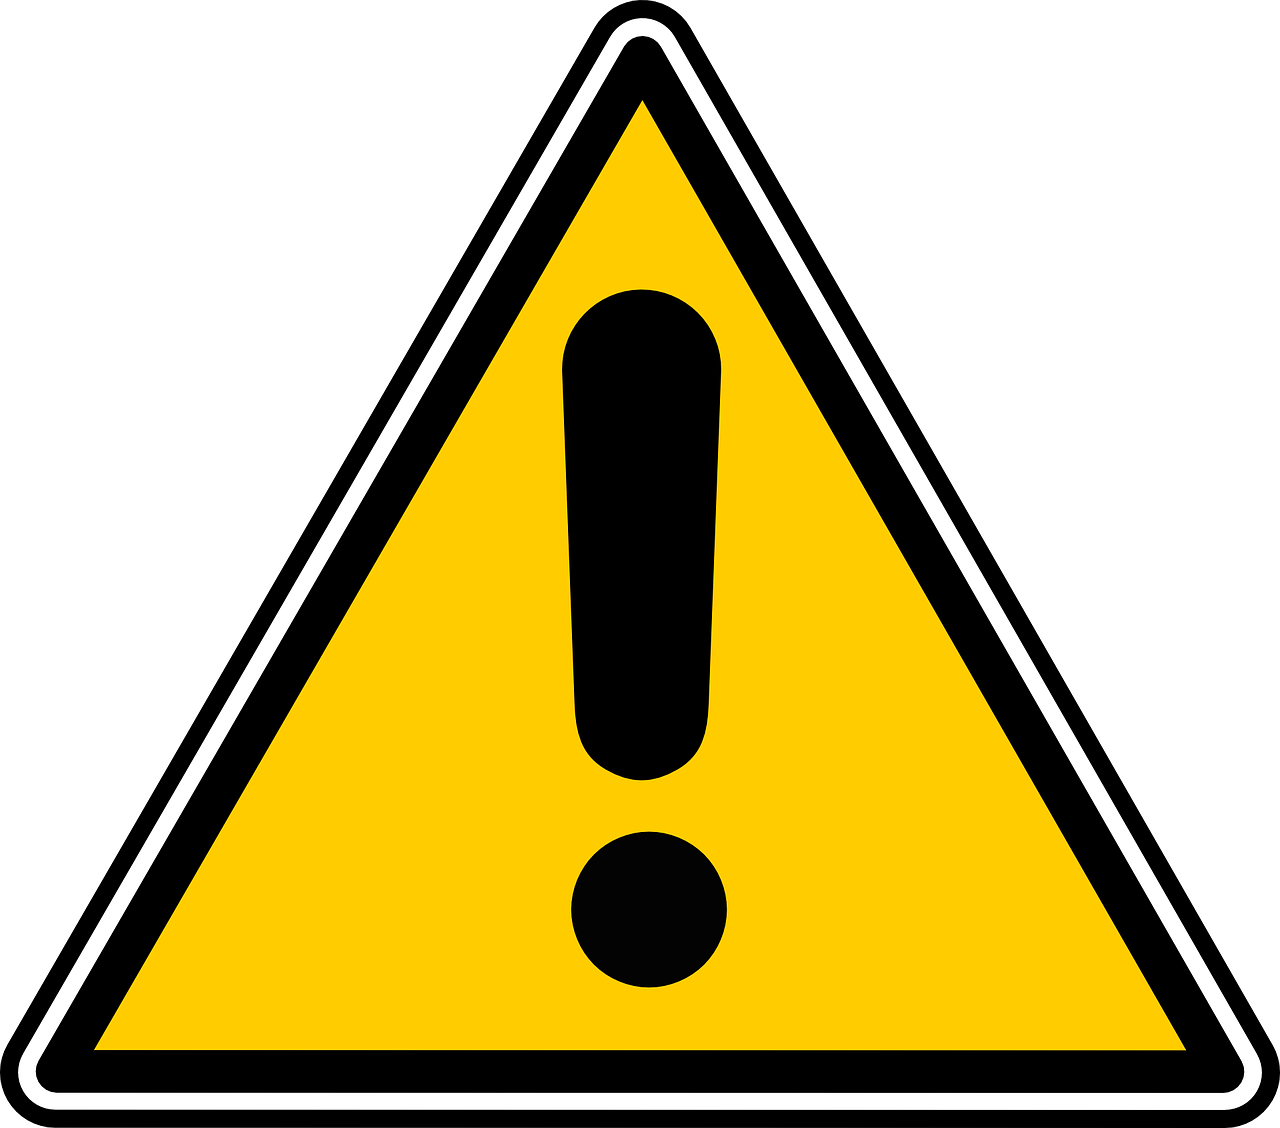 exclamation mark,point,triangle,punctuation,yellow,warning,sign,symbol,dangerous,precaution,free vector graphics,free pictures, free photos, free images, royalty free, free illustrations, public domain